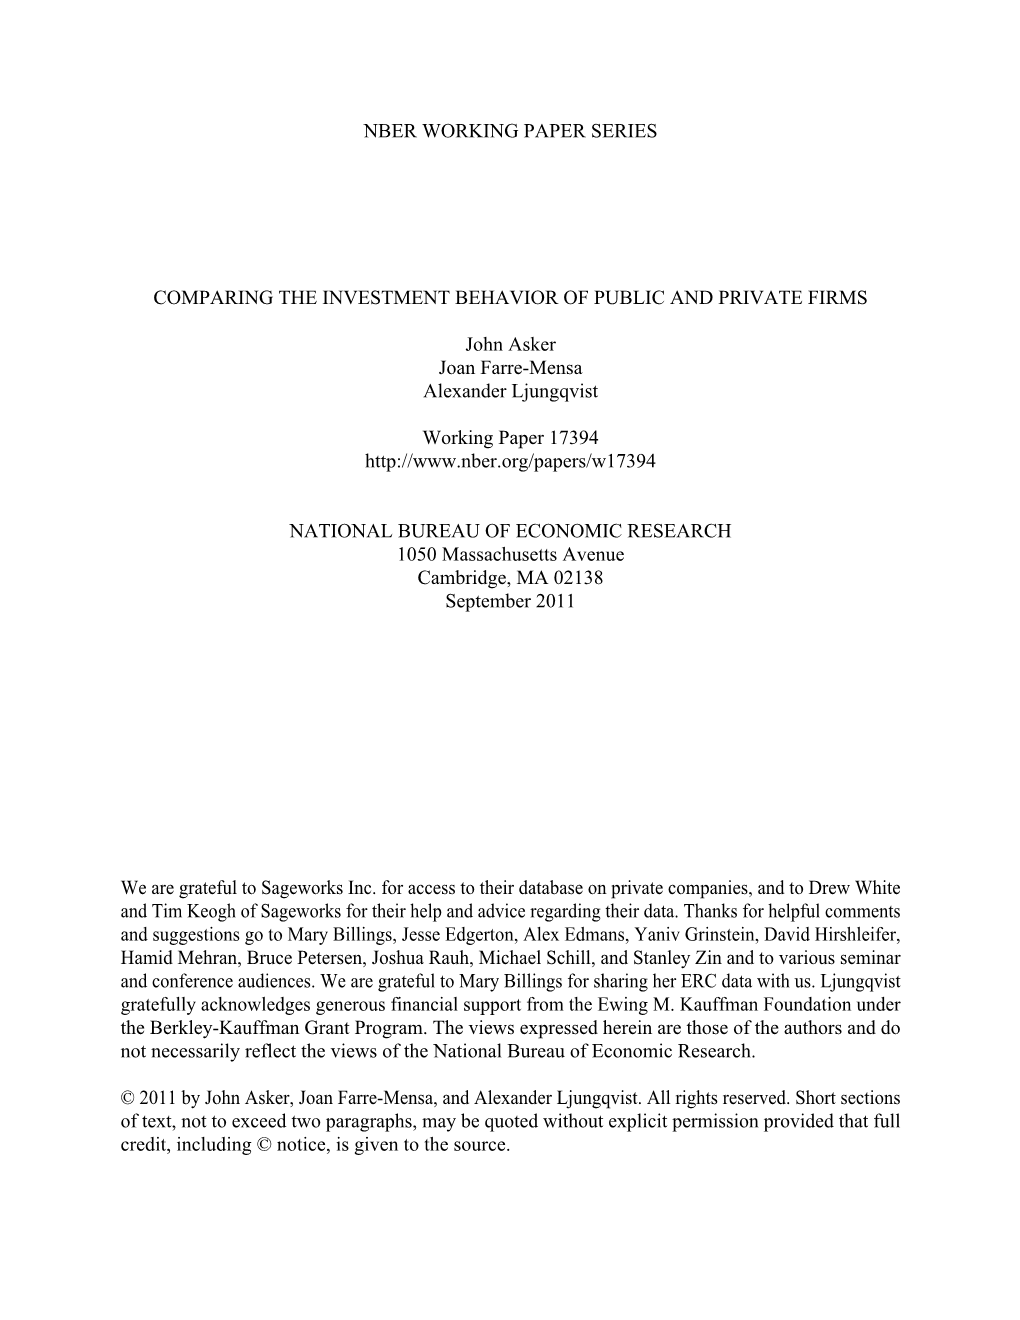 Does the Stock Market Distort Investment Incentives?”, Working Paper, NYU